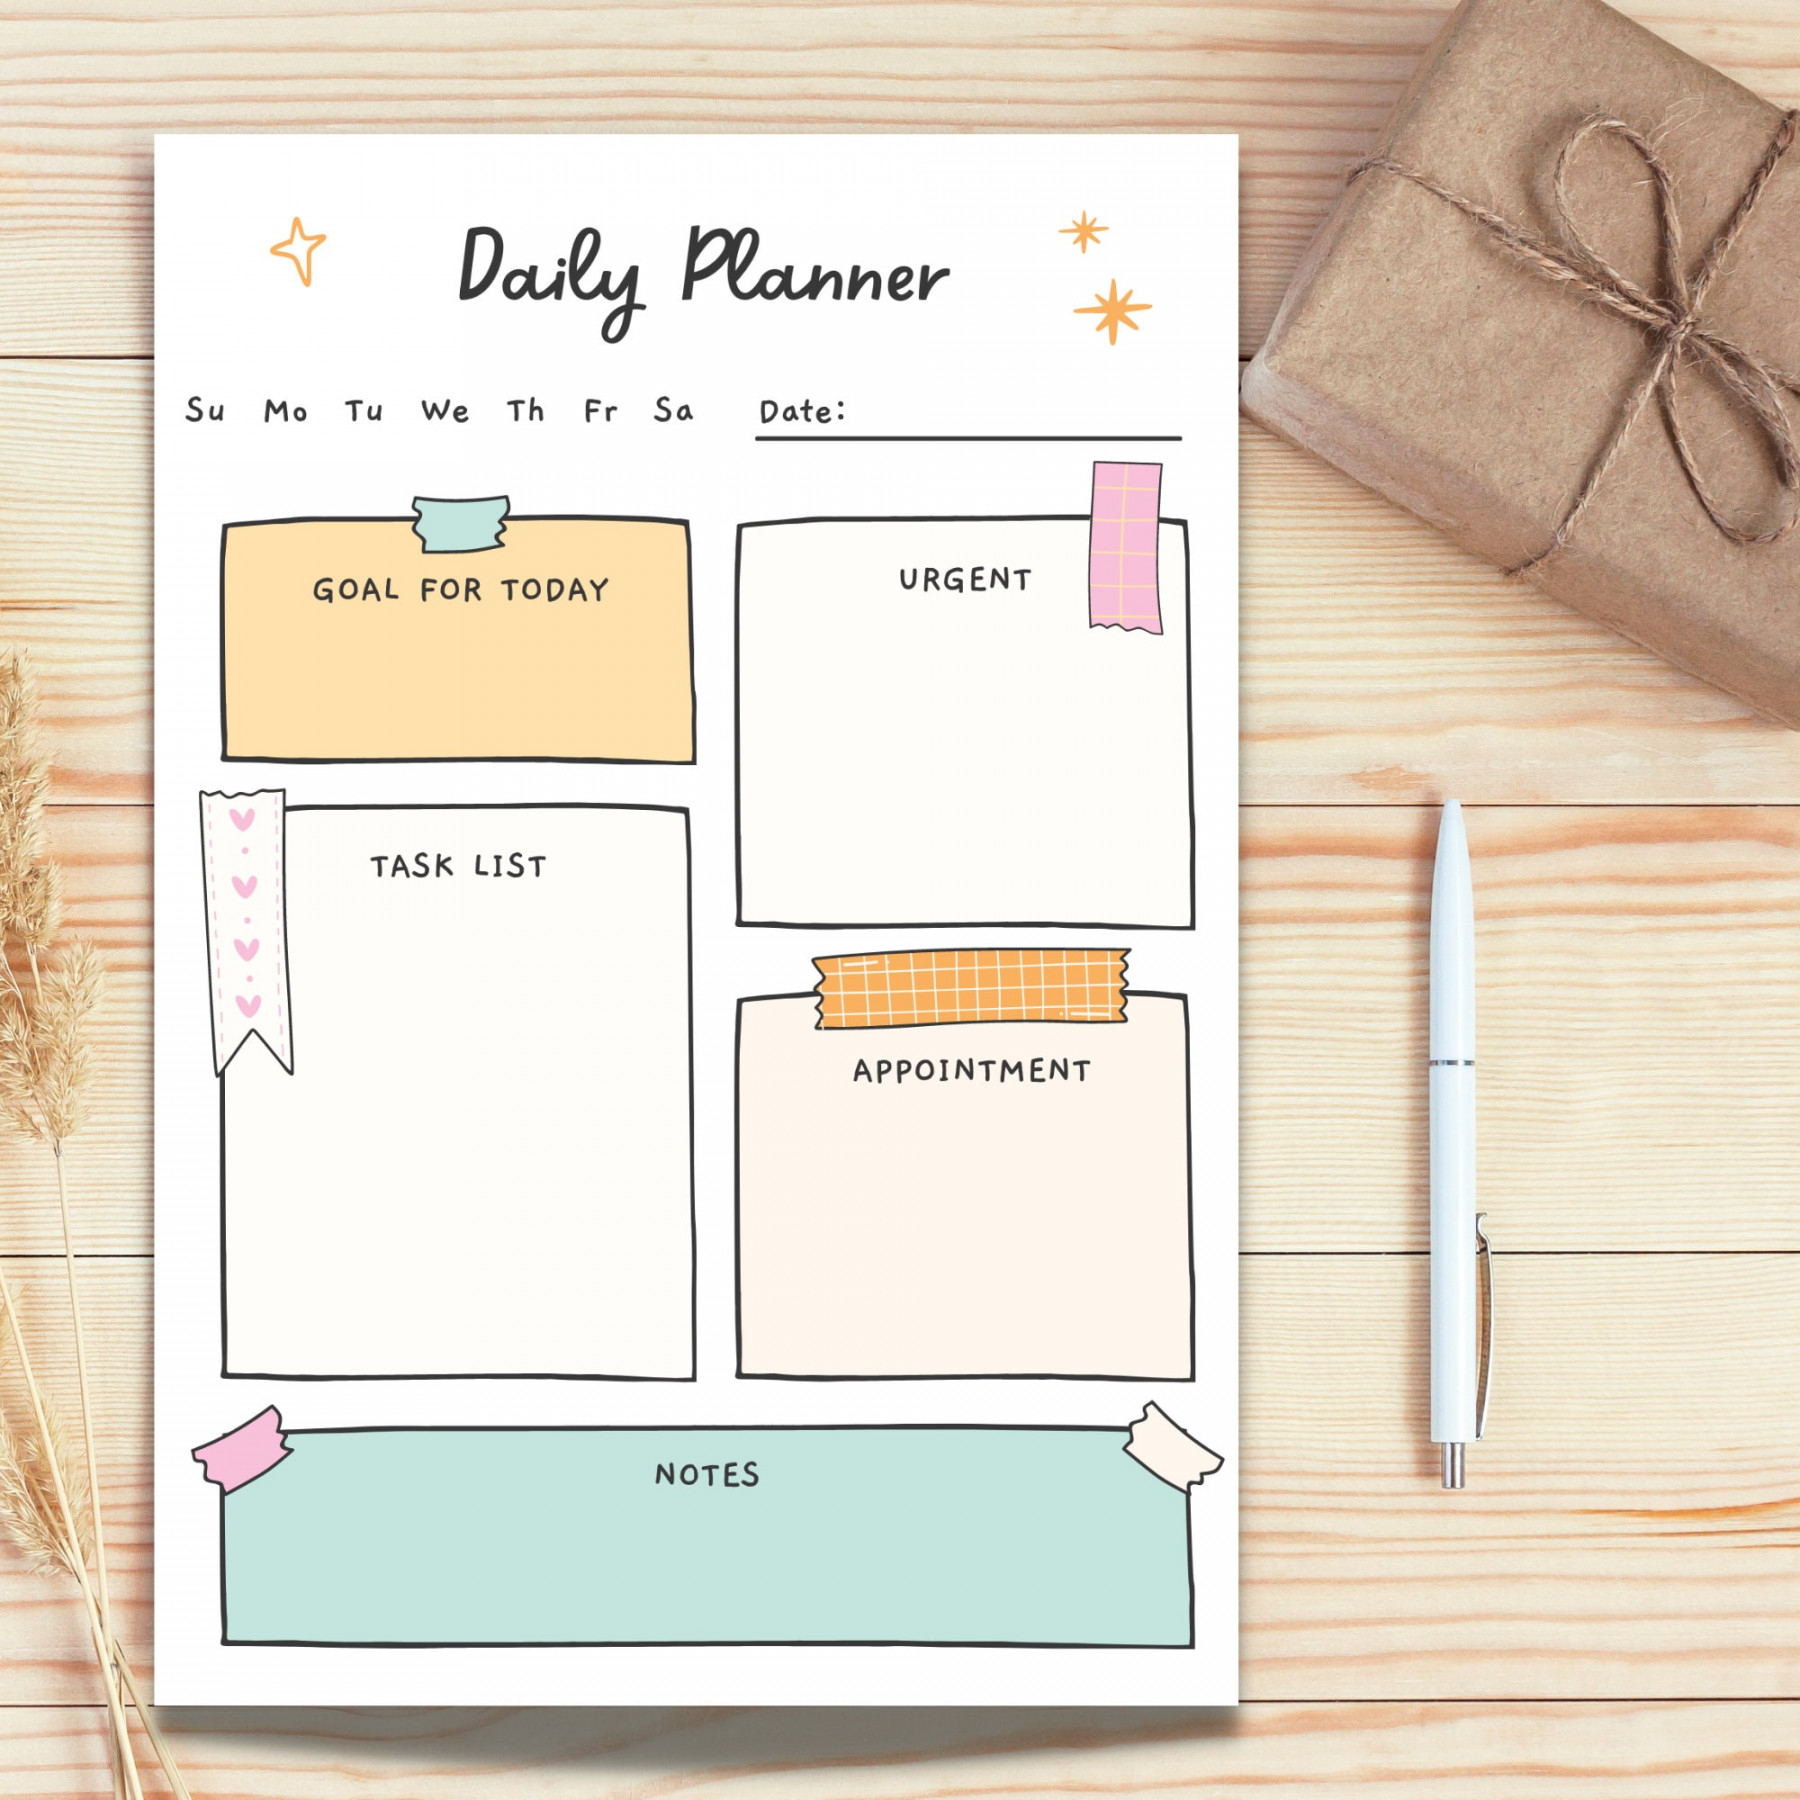 DAILY PLANNER PRINTABLE: Cute Simple Planner Sheet Digital Journal Schedule  To Do List Notebook Template Goodnotes pdf Undated Pages Insert